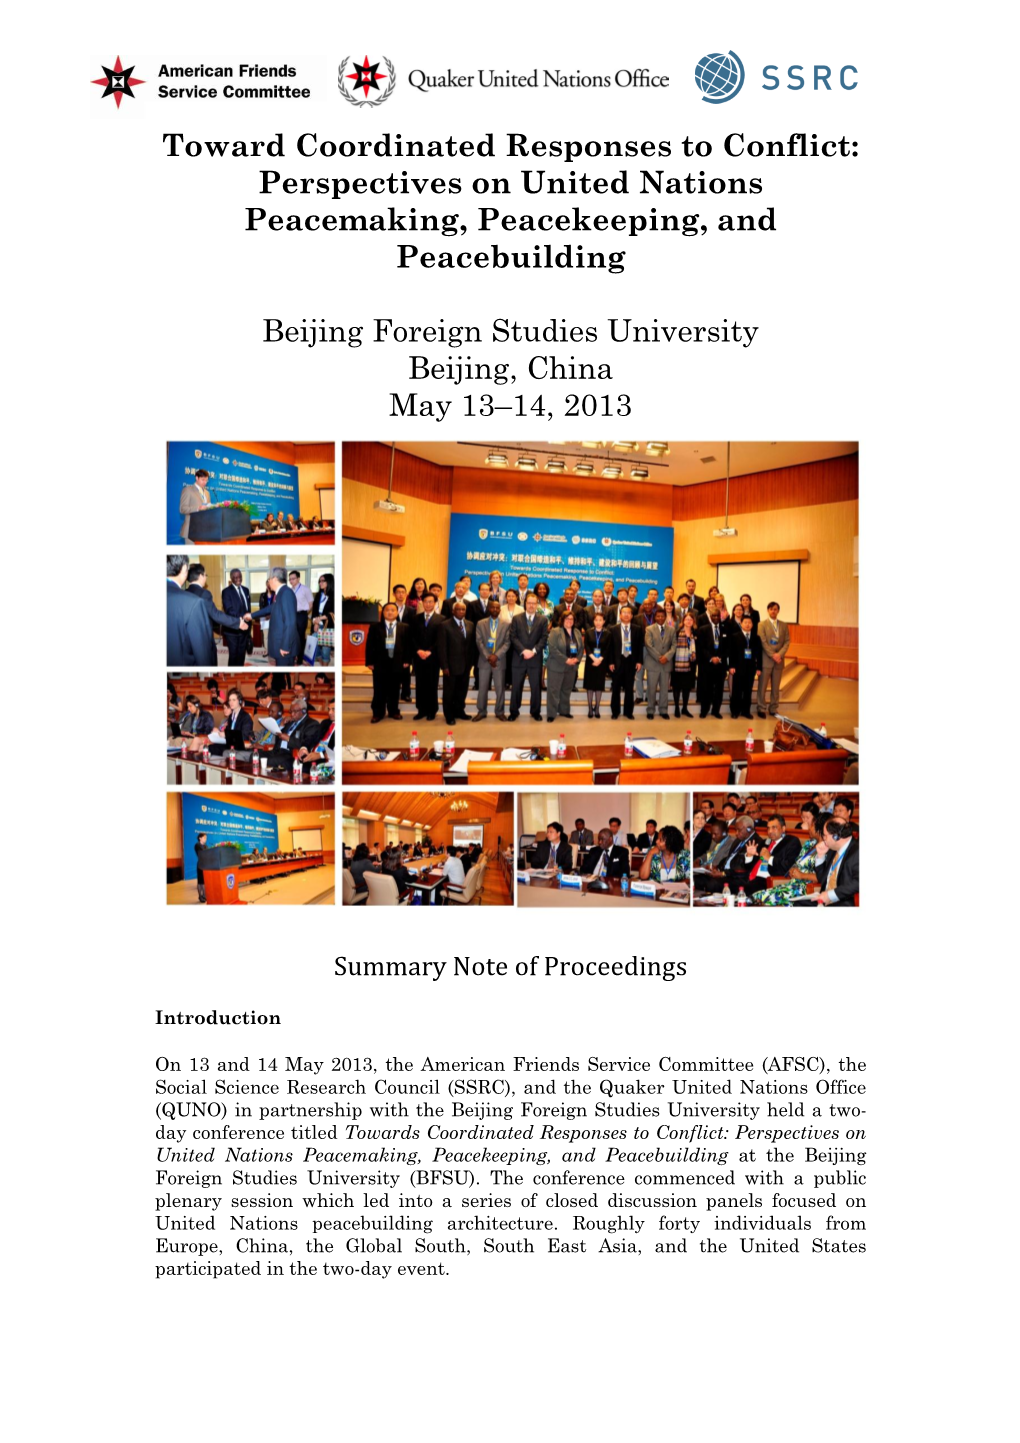 Toward Coordinated Responses to Conflict: Perspectives on United Nations Peacemaking, Peacekeeping, and Peacebuilding